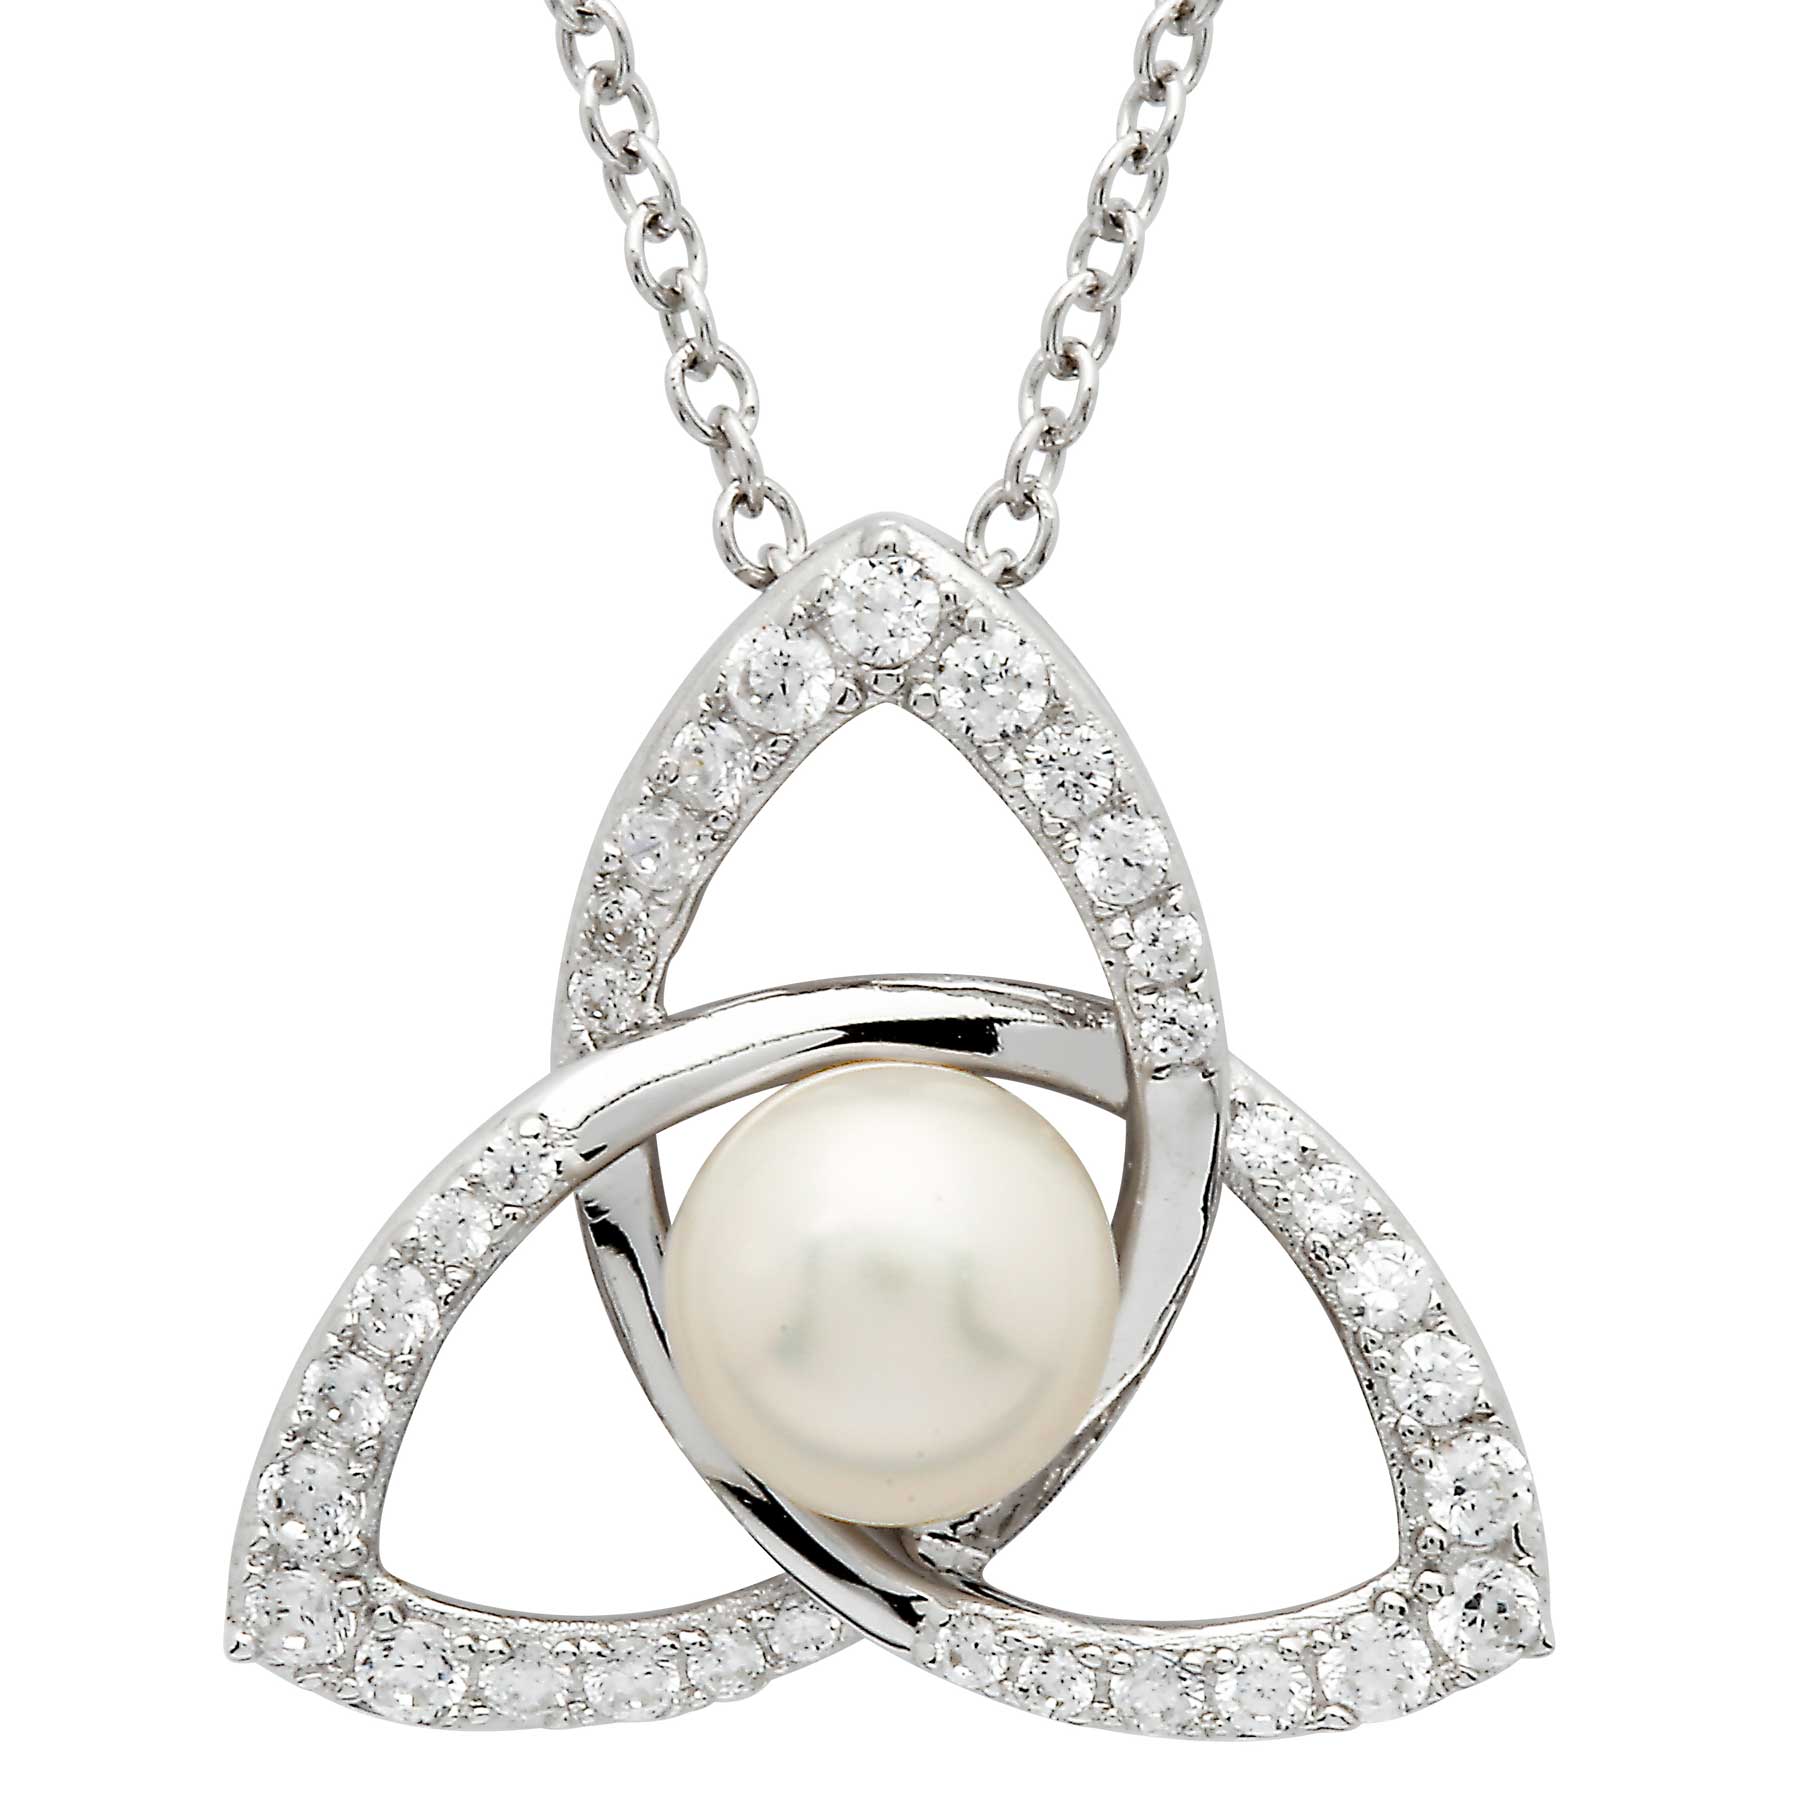 Product image for Irish Necklace | Sterling Silver Trinity Knot Crystal & Pearl Pendant